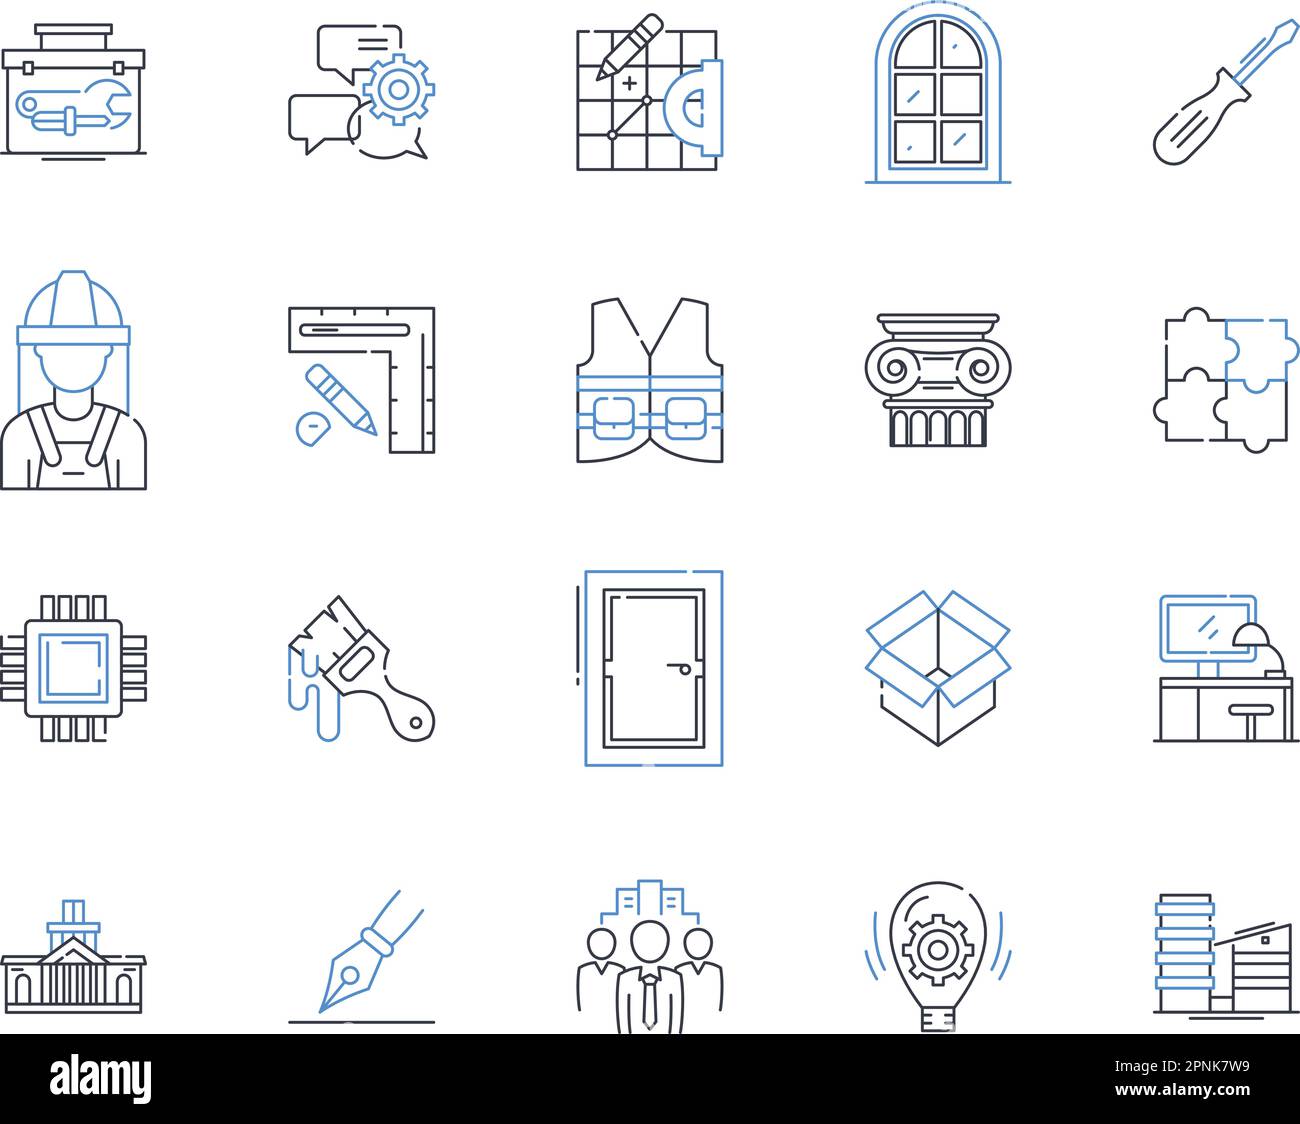 Information systems line icons collection. Database, Analytics, ERP, CRM, Nerking, Security, Integration vector and linear illustration. Business Stock Vector